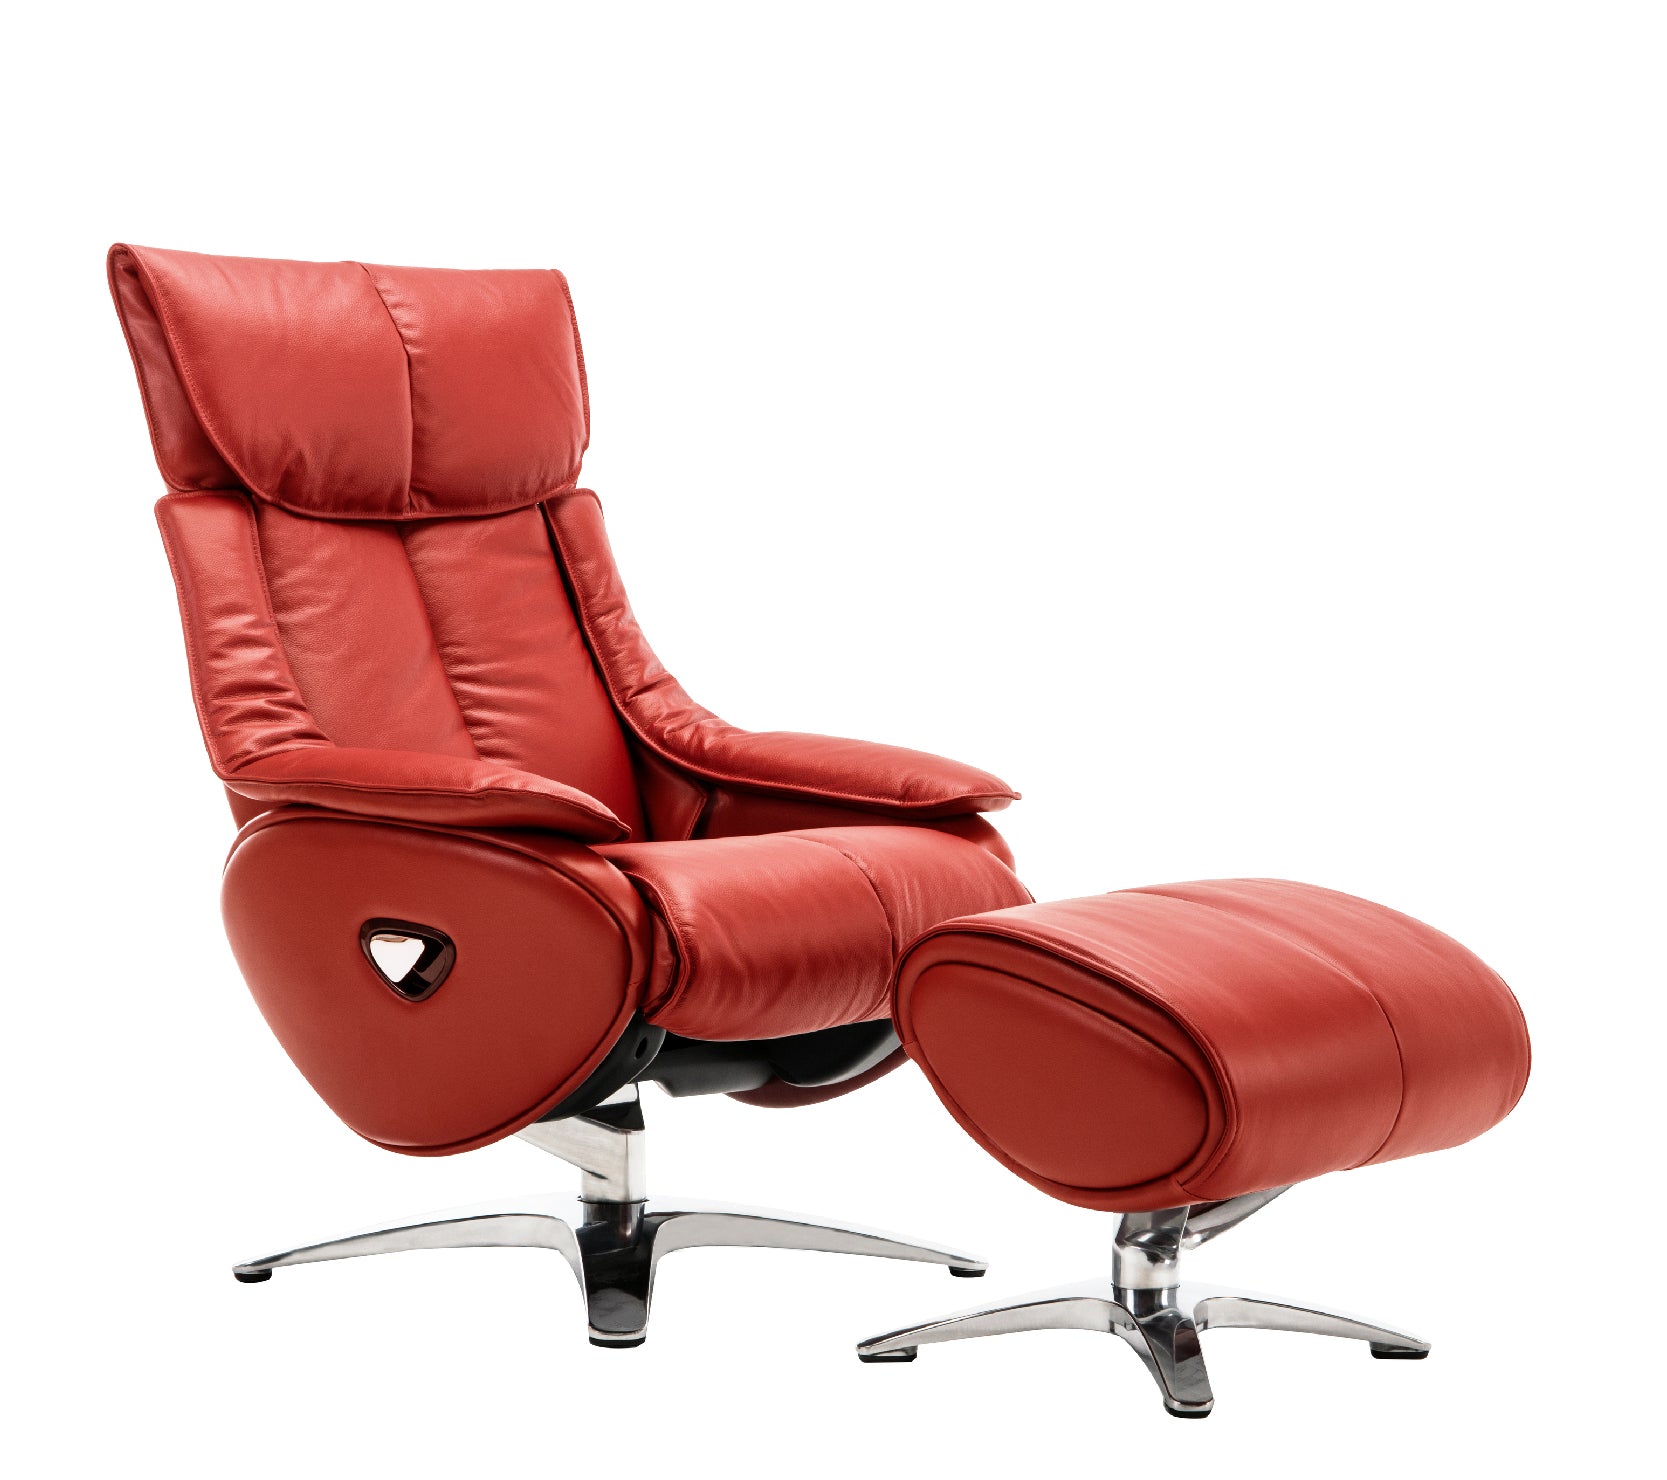 Alpha 108 (Red) Recliner Chair *ONLY DISPLAY AT NUNAWADING STORE*